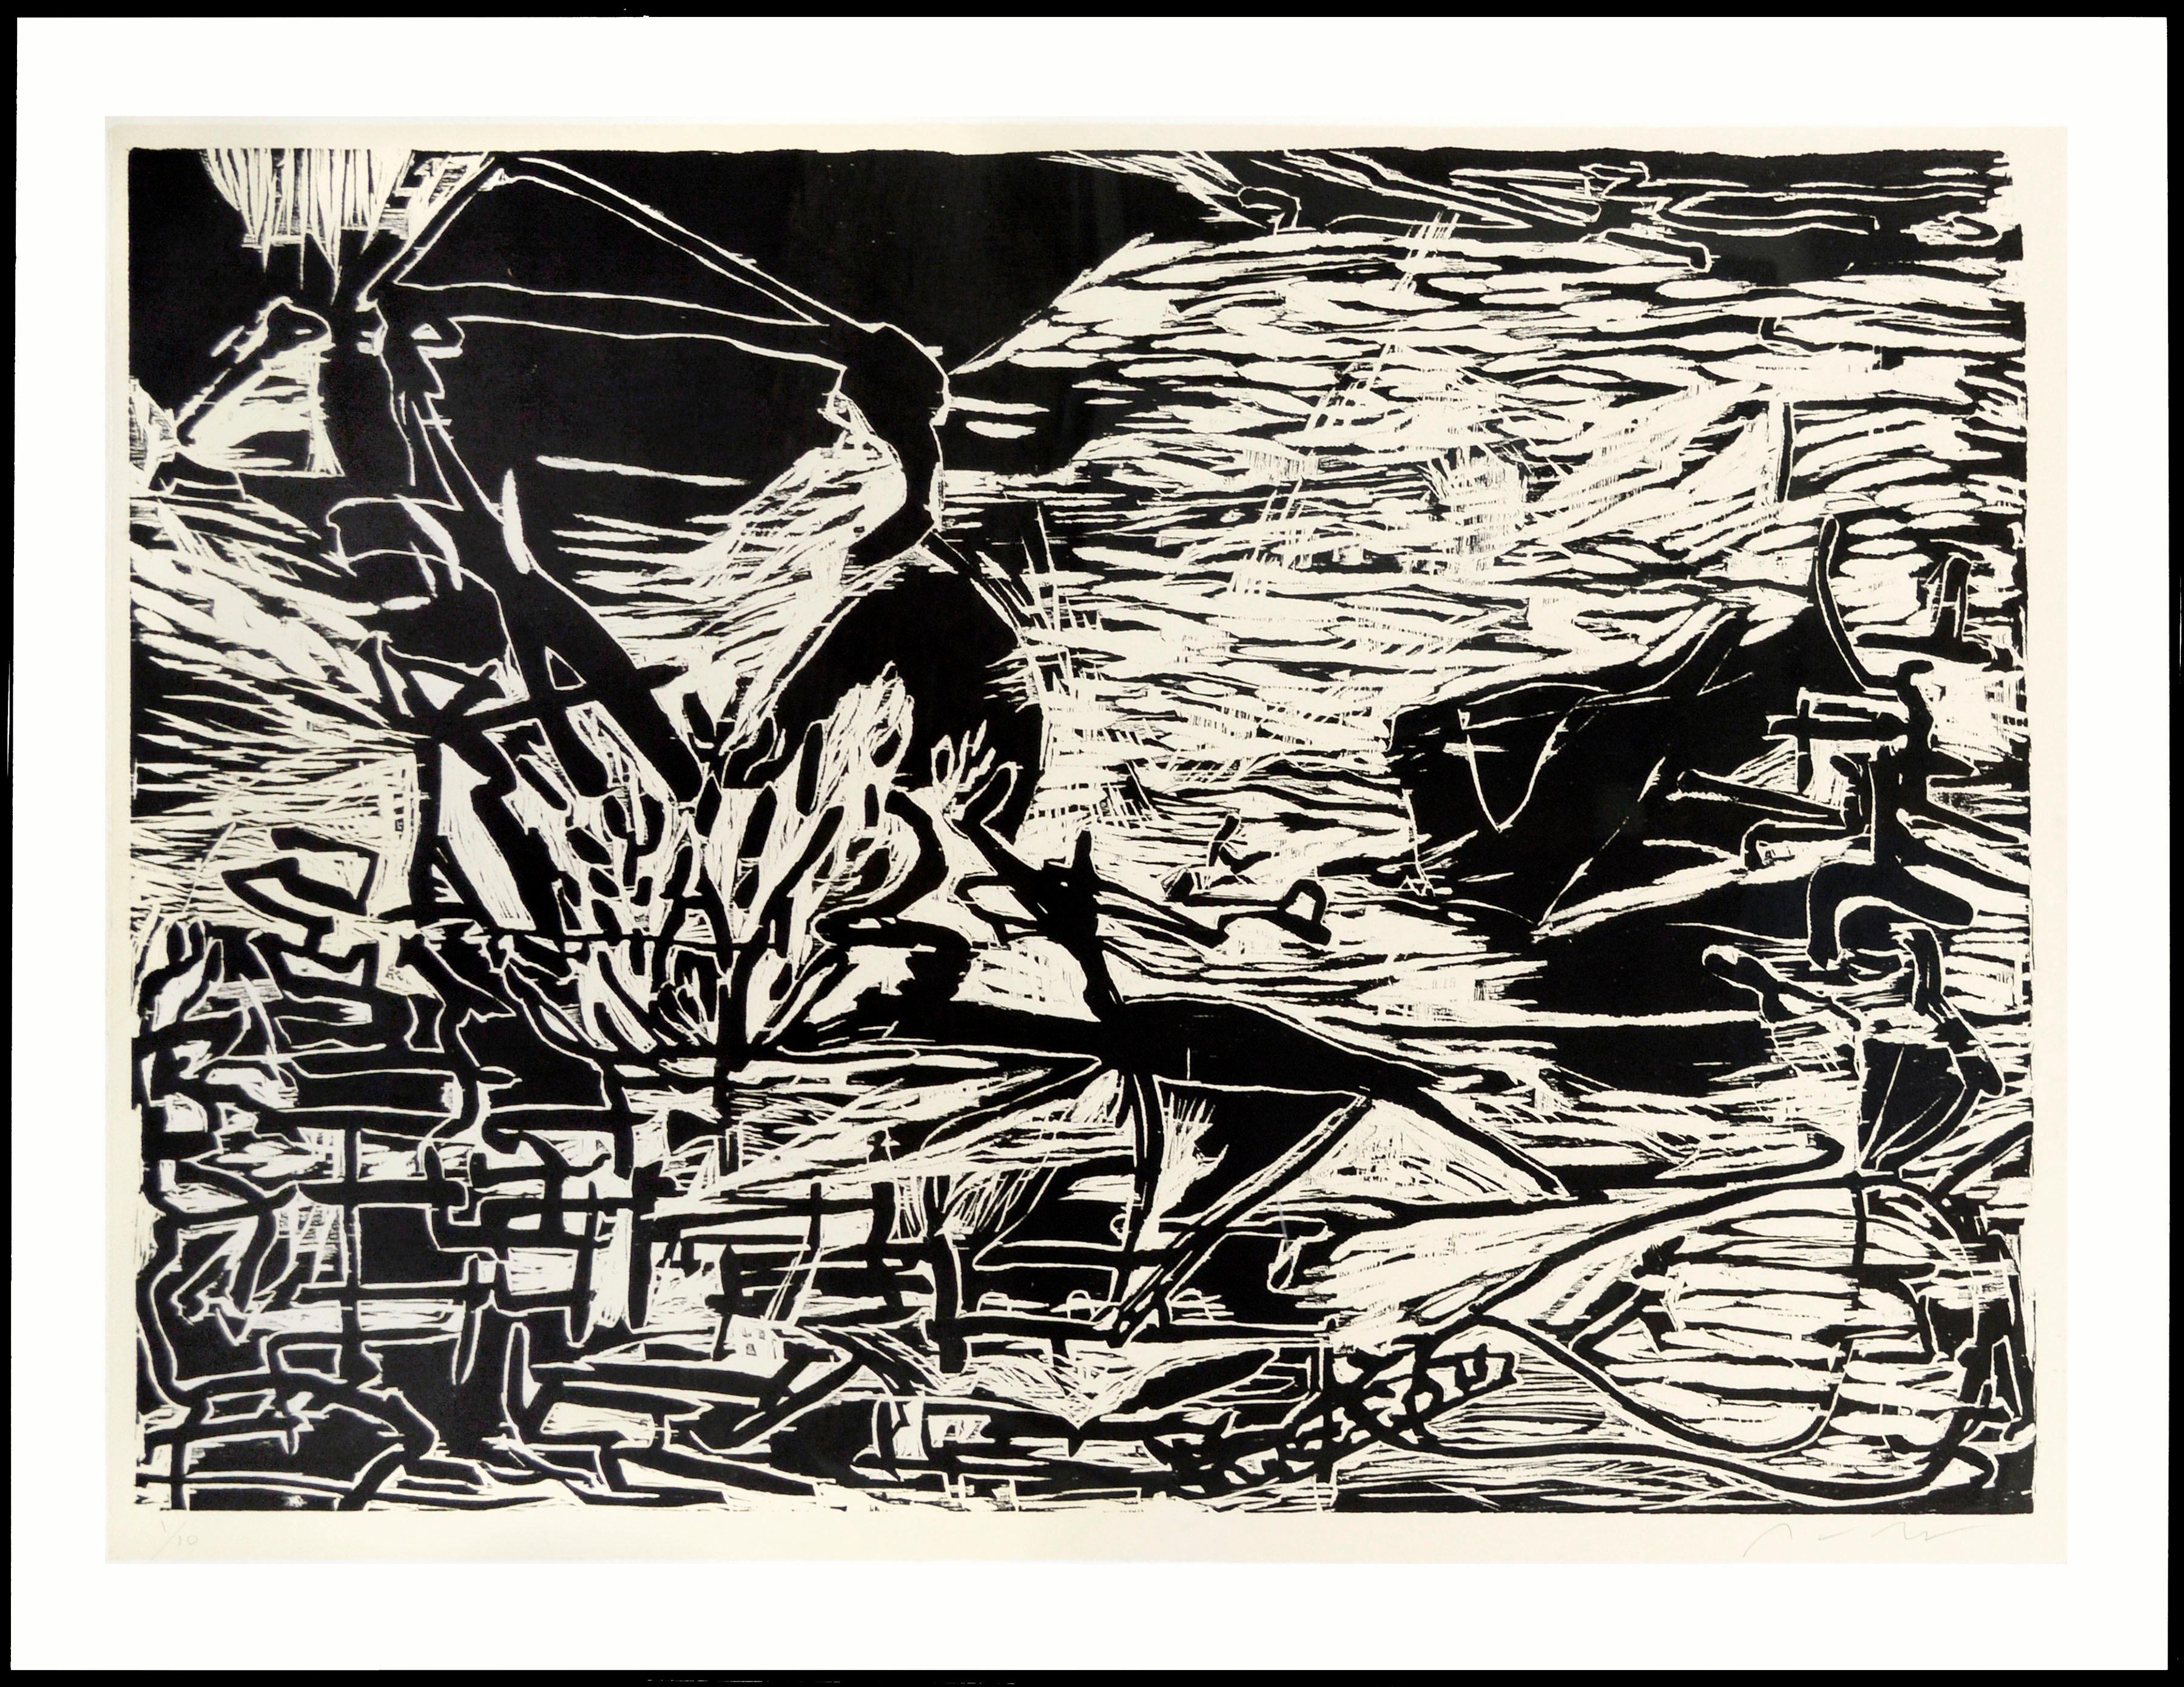 Large Scale Abstract Figurative Landscape Woodcut, Signed Limited Edition 1/10 